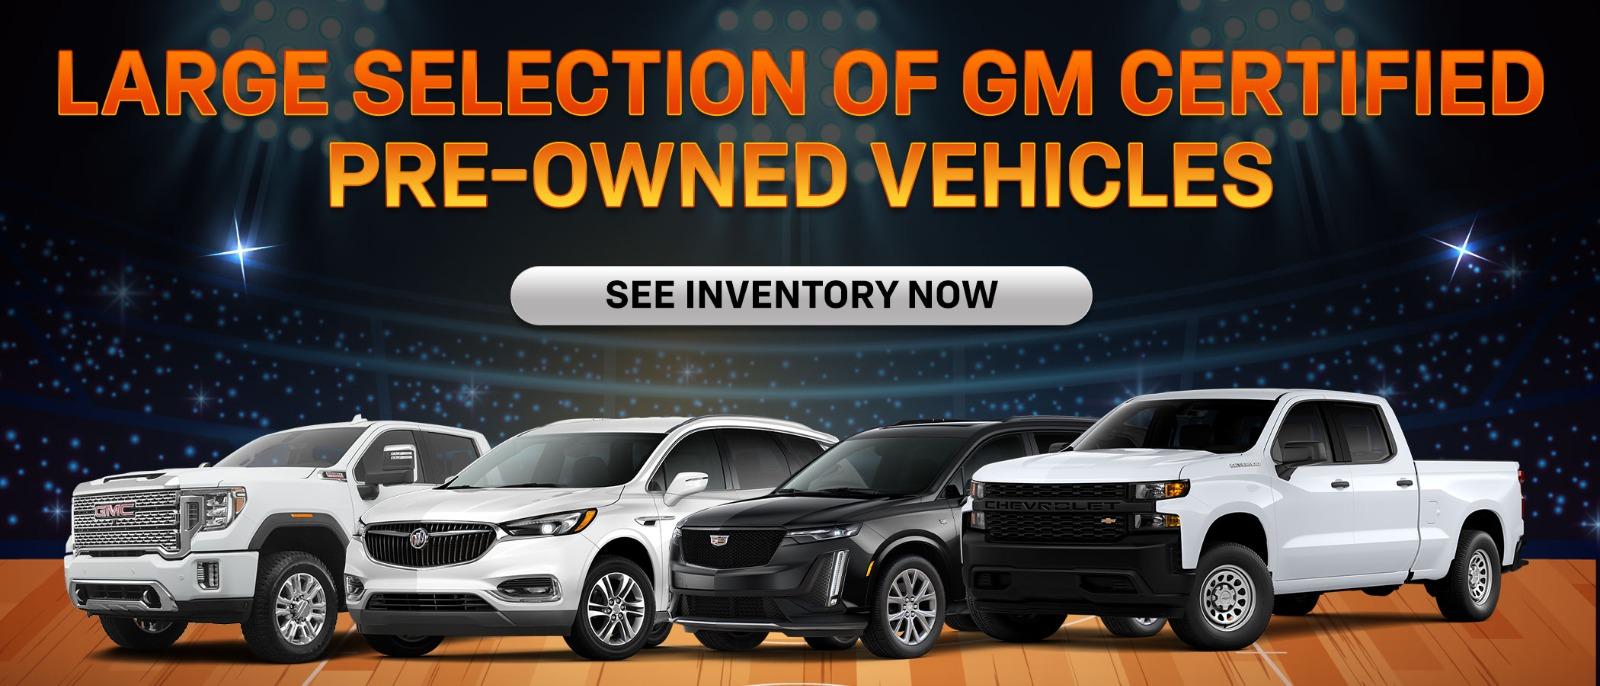 Large Selection of GM Certified Pre-Owned Vehicles